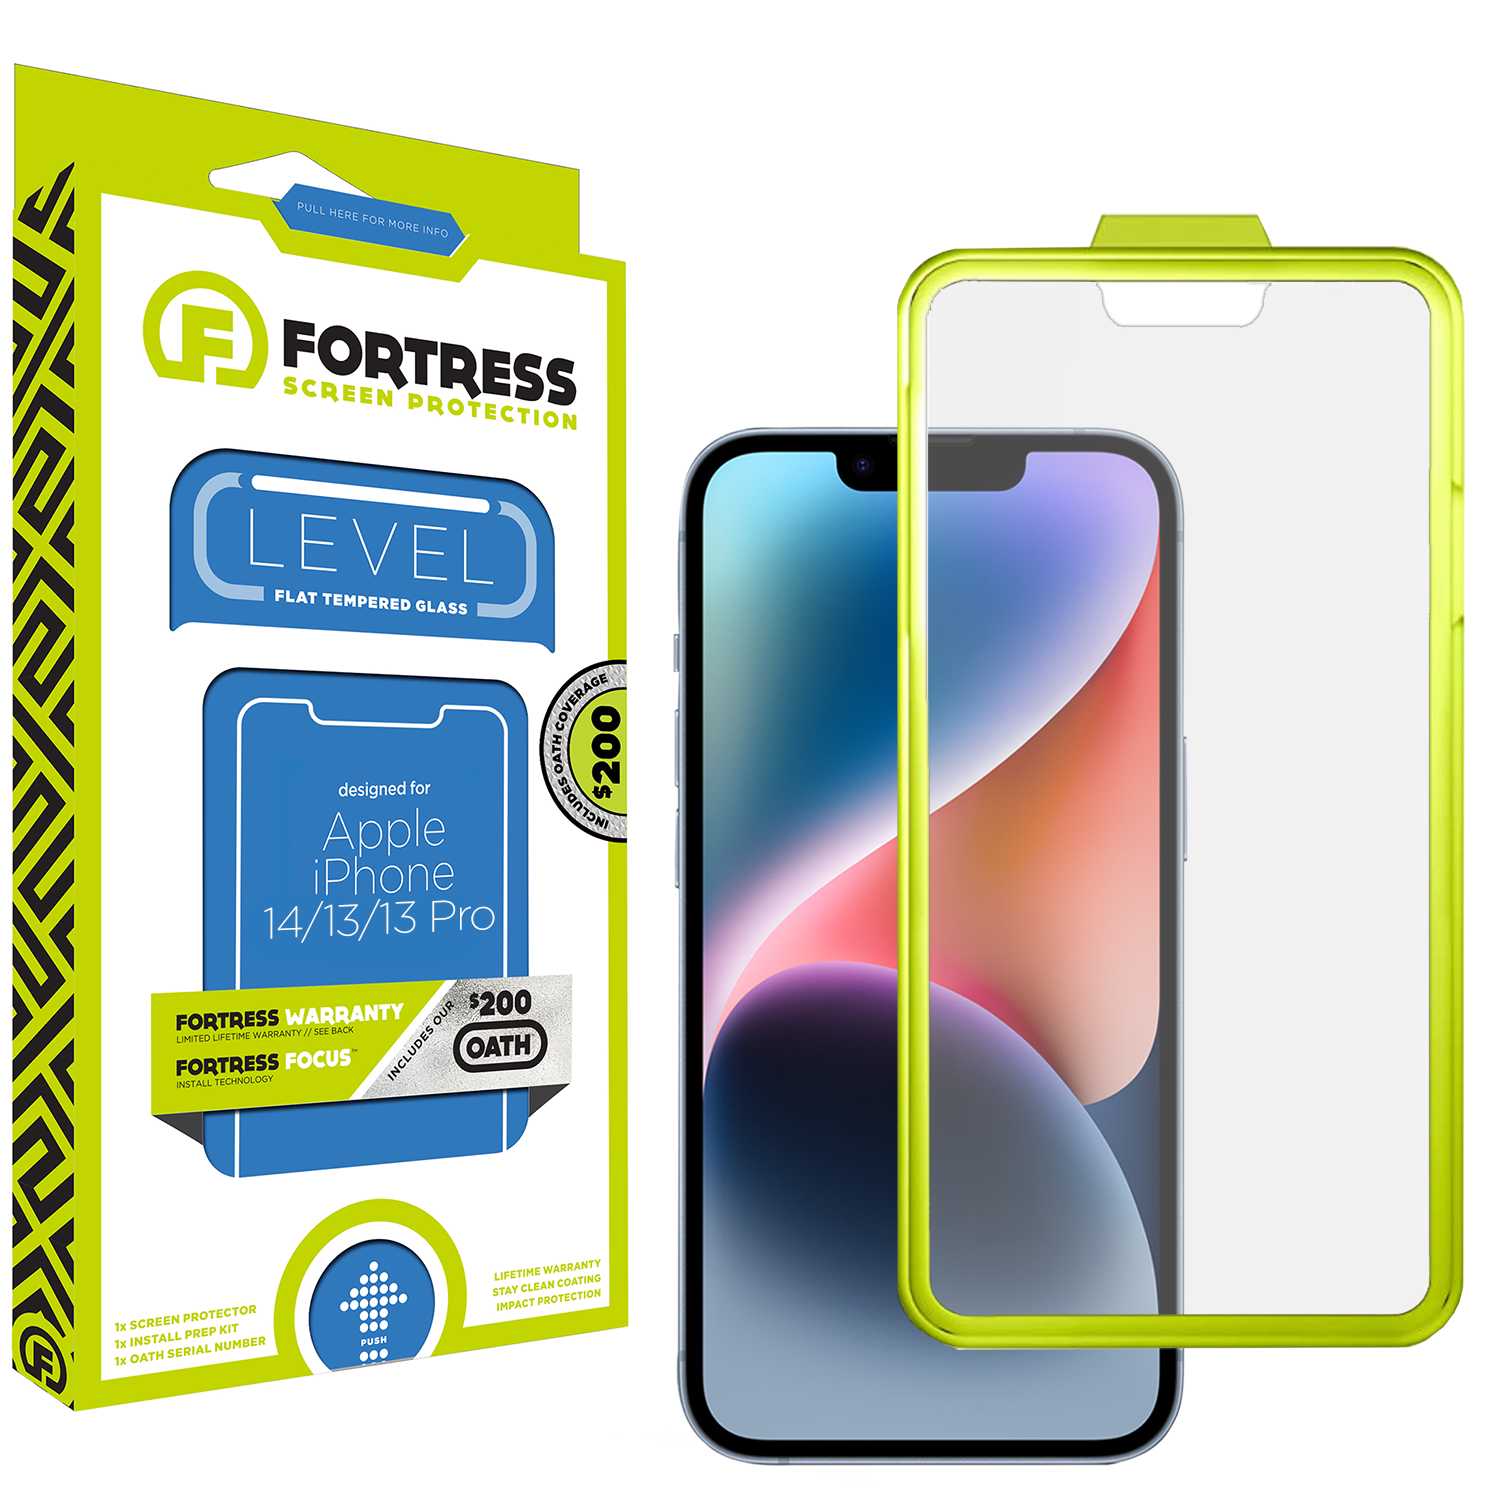 Fortress iPhone 14 Screen Protector $200CoverageInstallTool Scooch Screen Protector